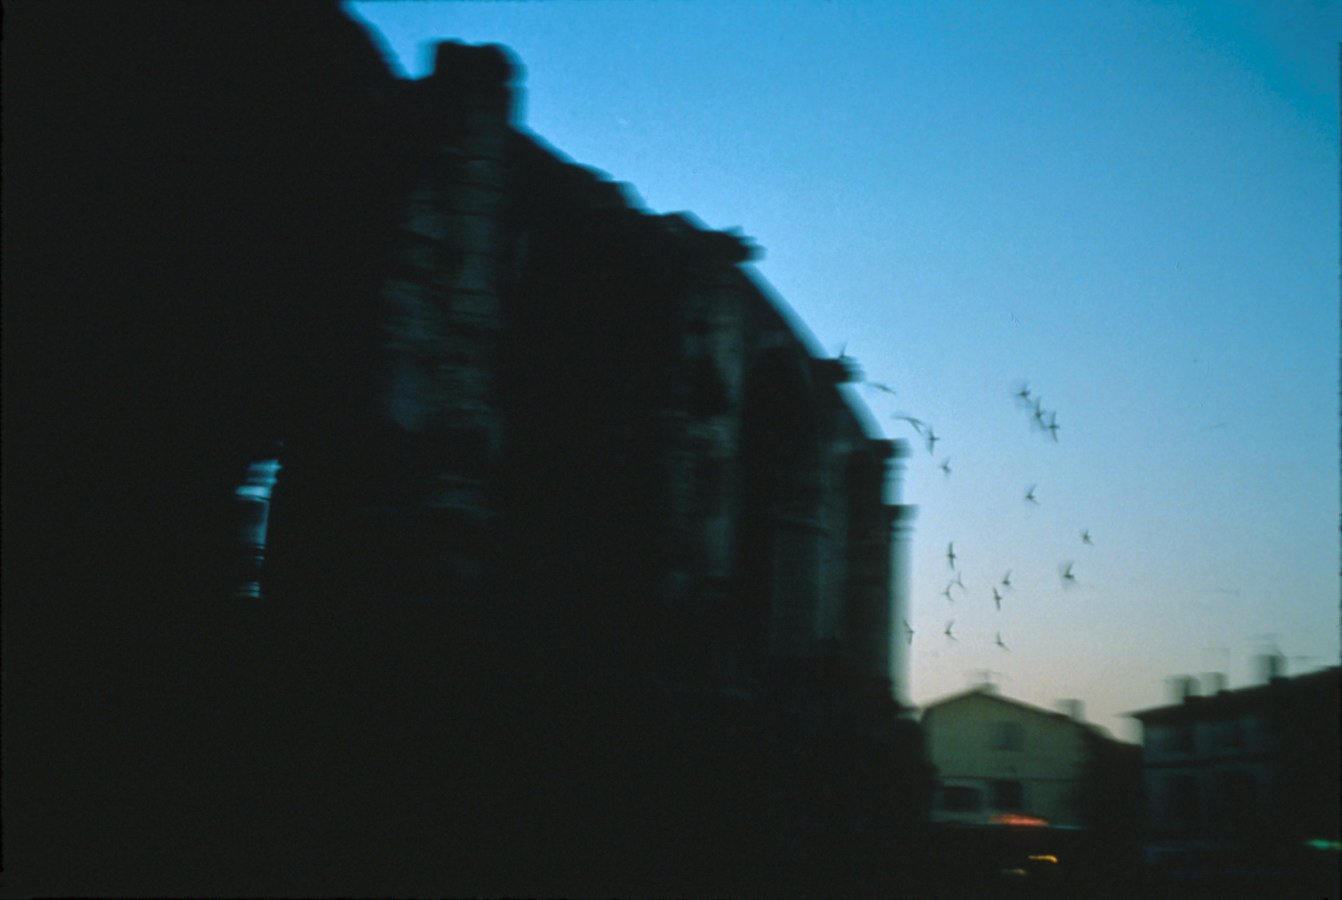 Blurred color photograph of a silhouetted building at dusk with birds flying by